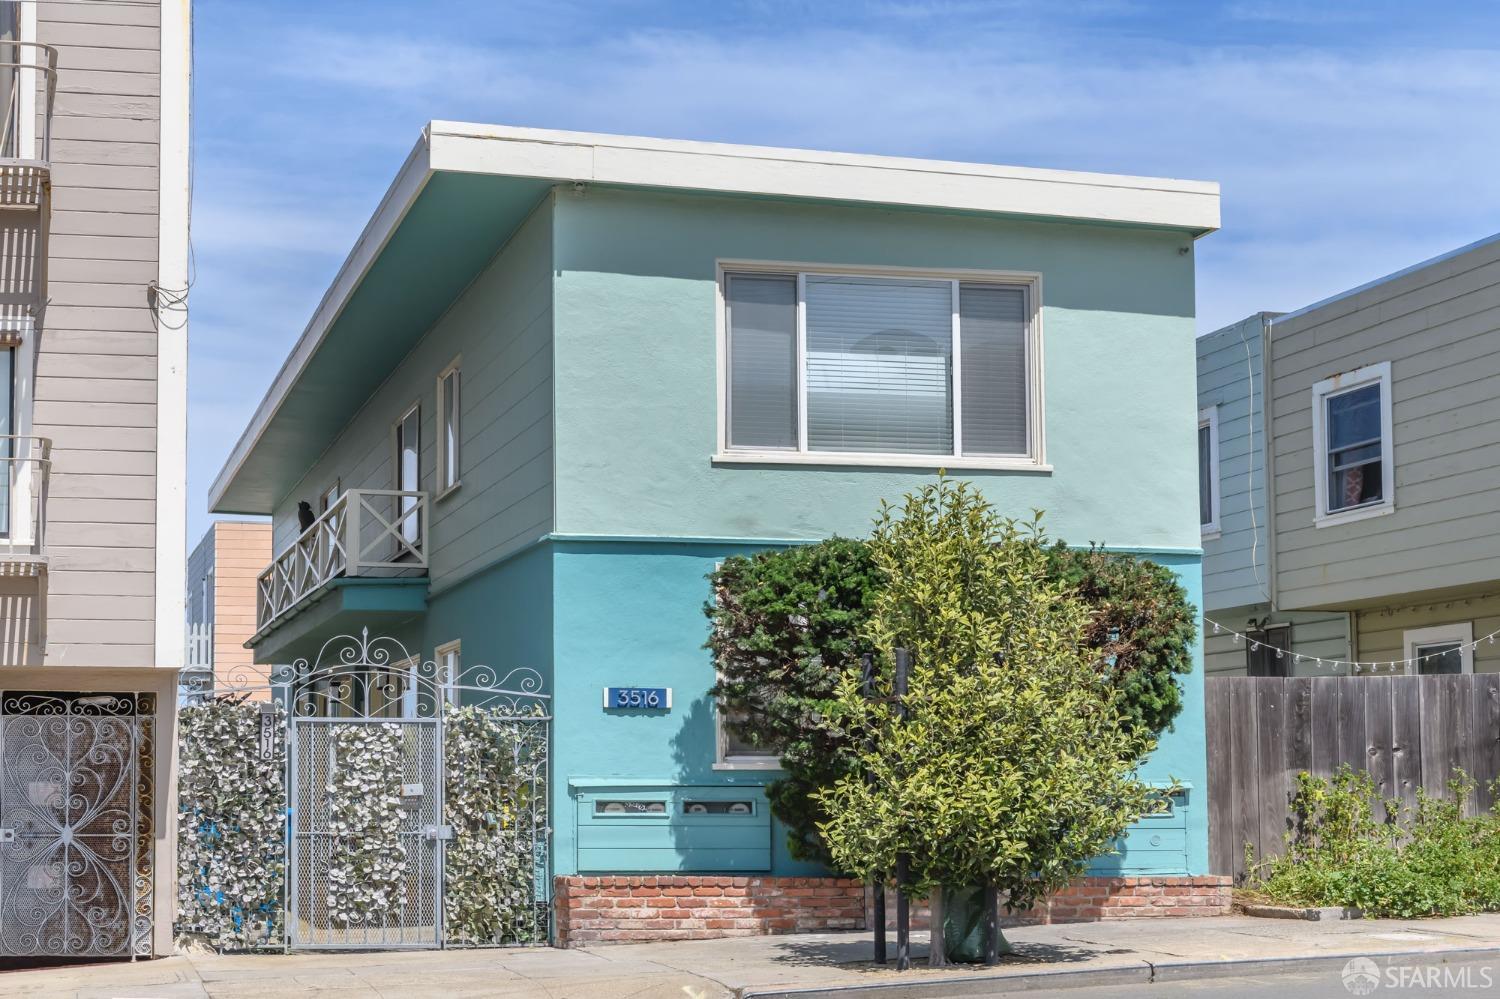 Welcome to 3516 Taraval. Four, one bedroom units. Two on ground level and two on upper level. The rear two mirror the front two 